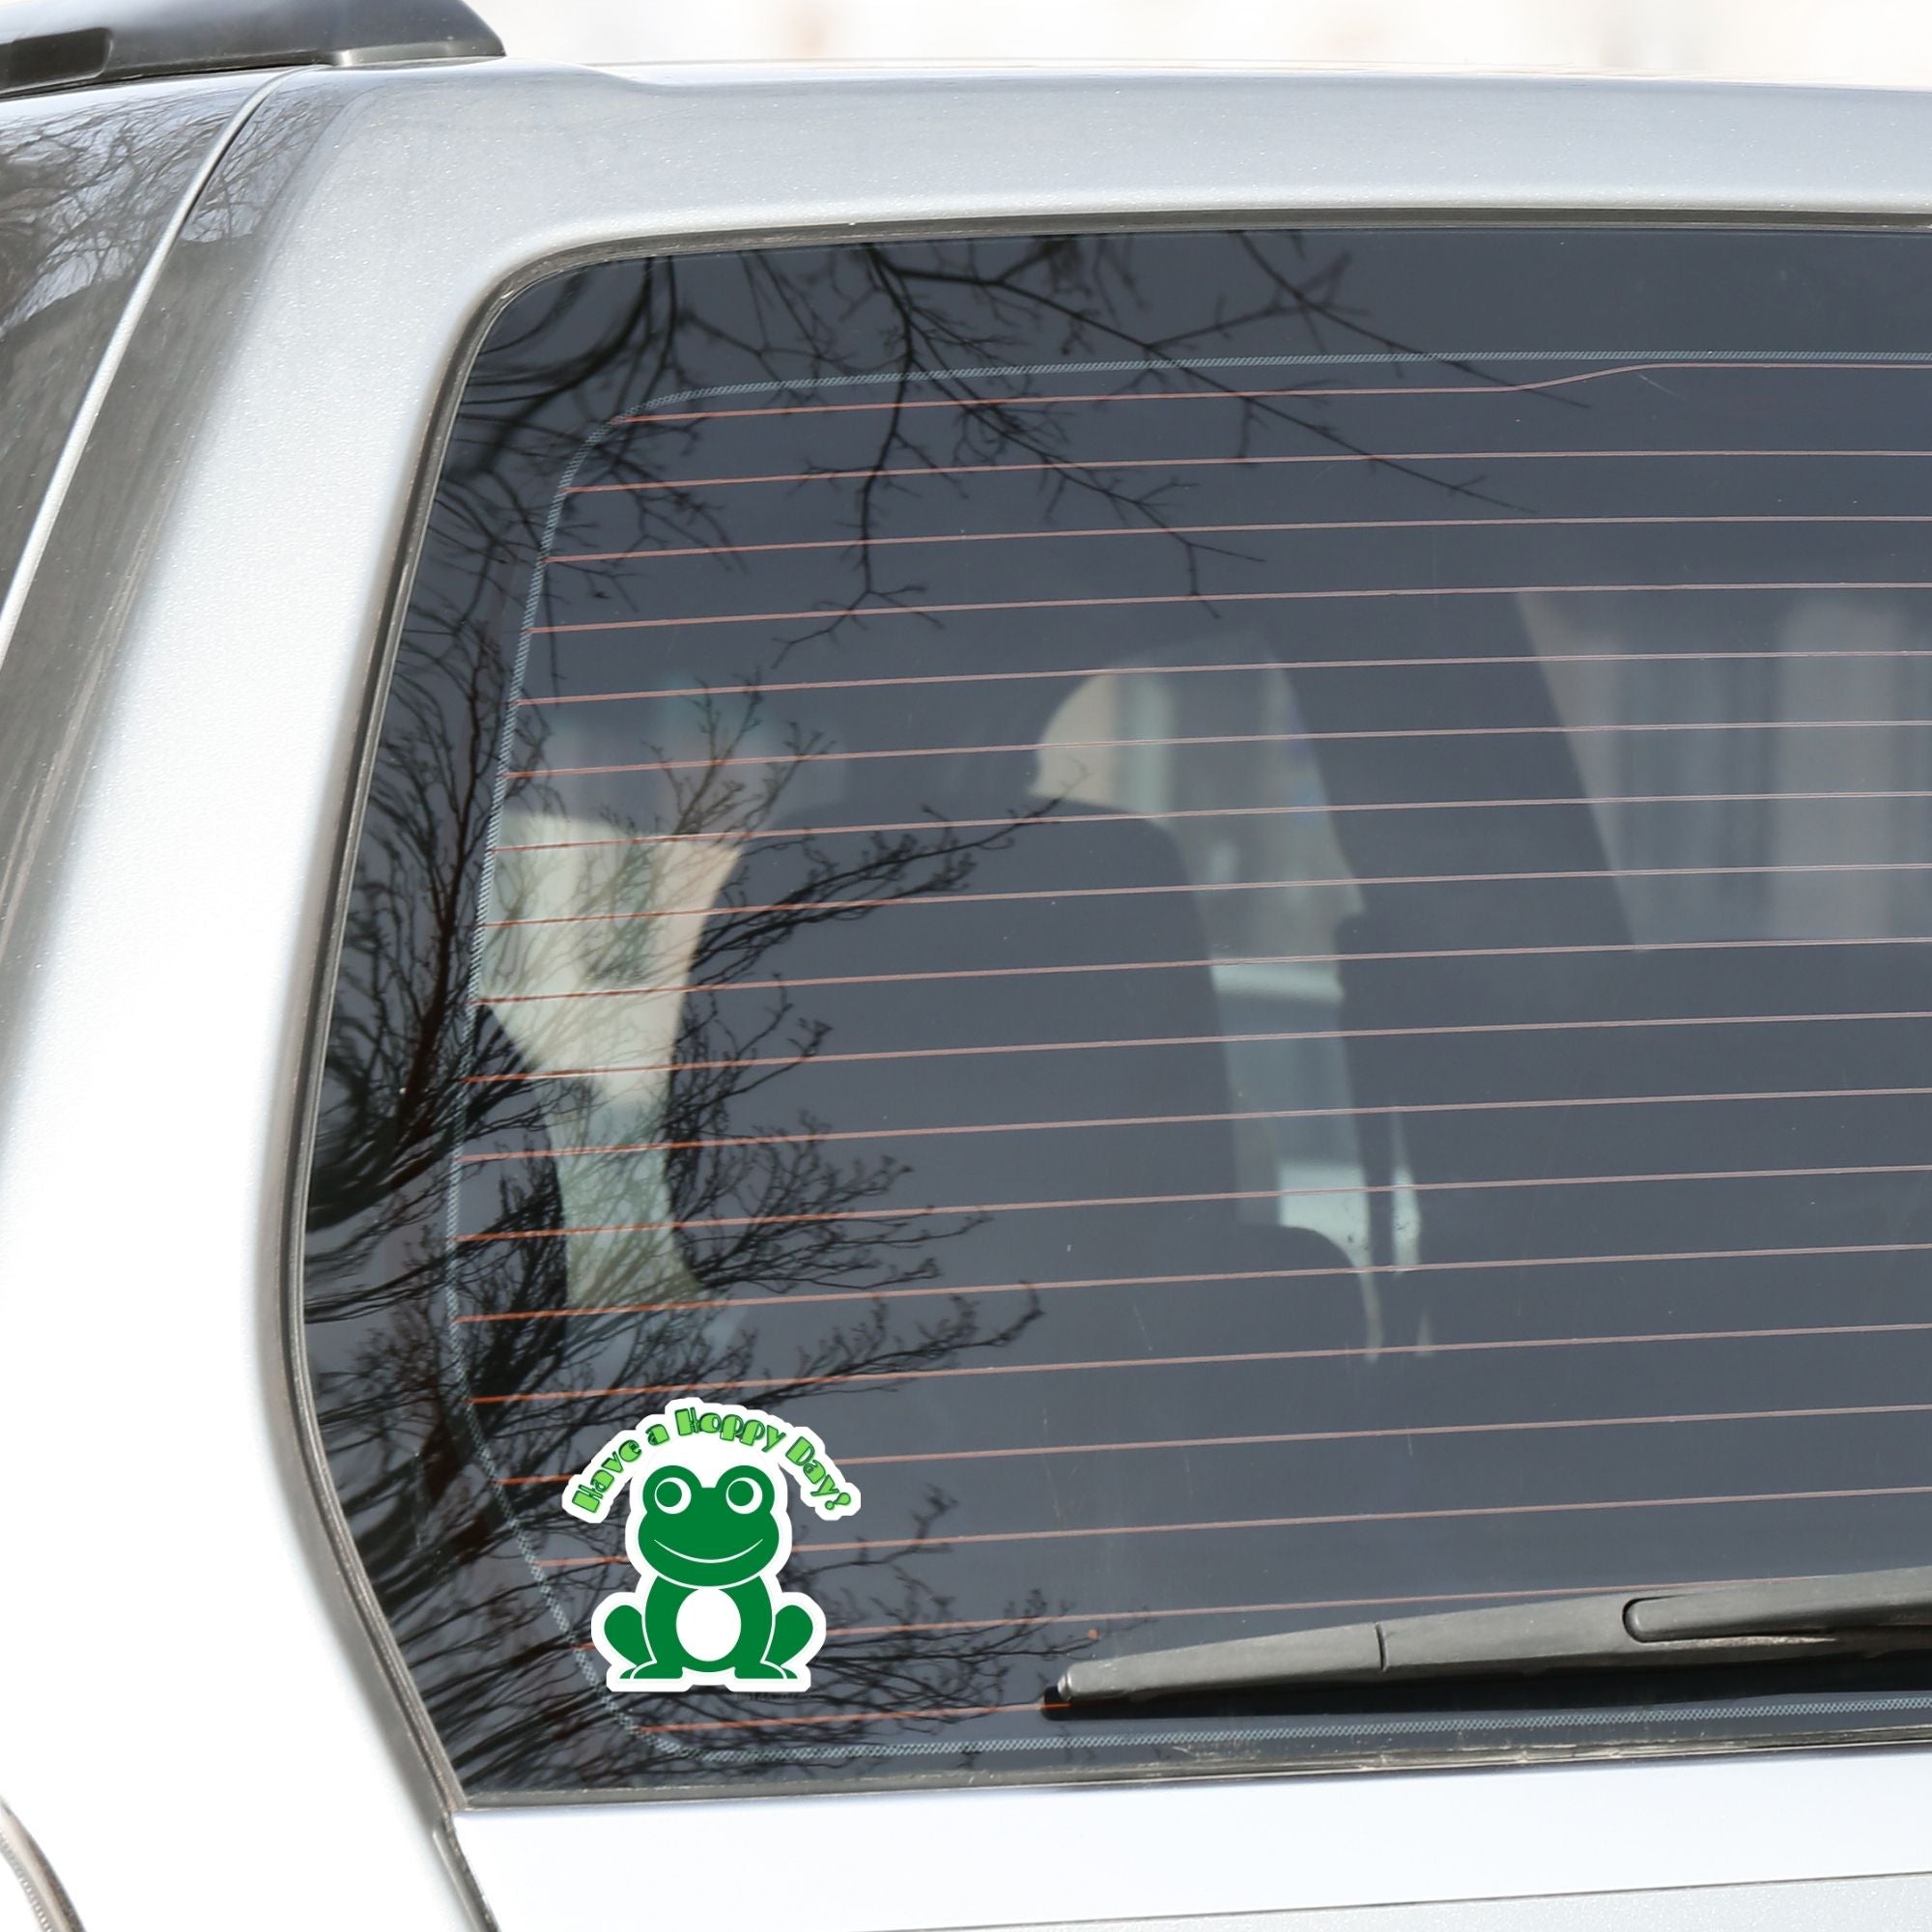 This inspirational sticker features a smiling frog with "Have a Hoppy Day!" written above. This image shows the Have a Hoppy Day sticker on the back window of a car.